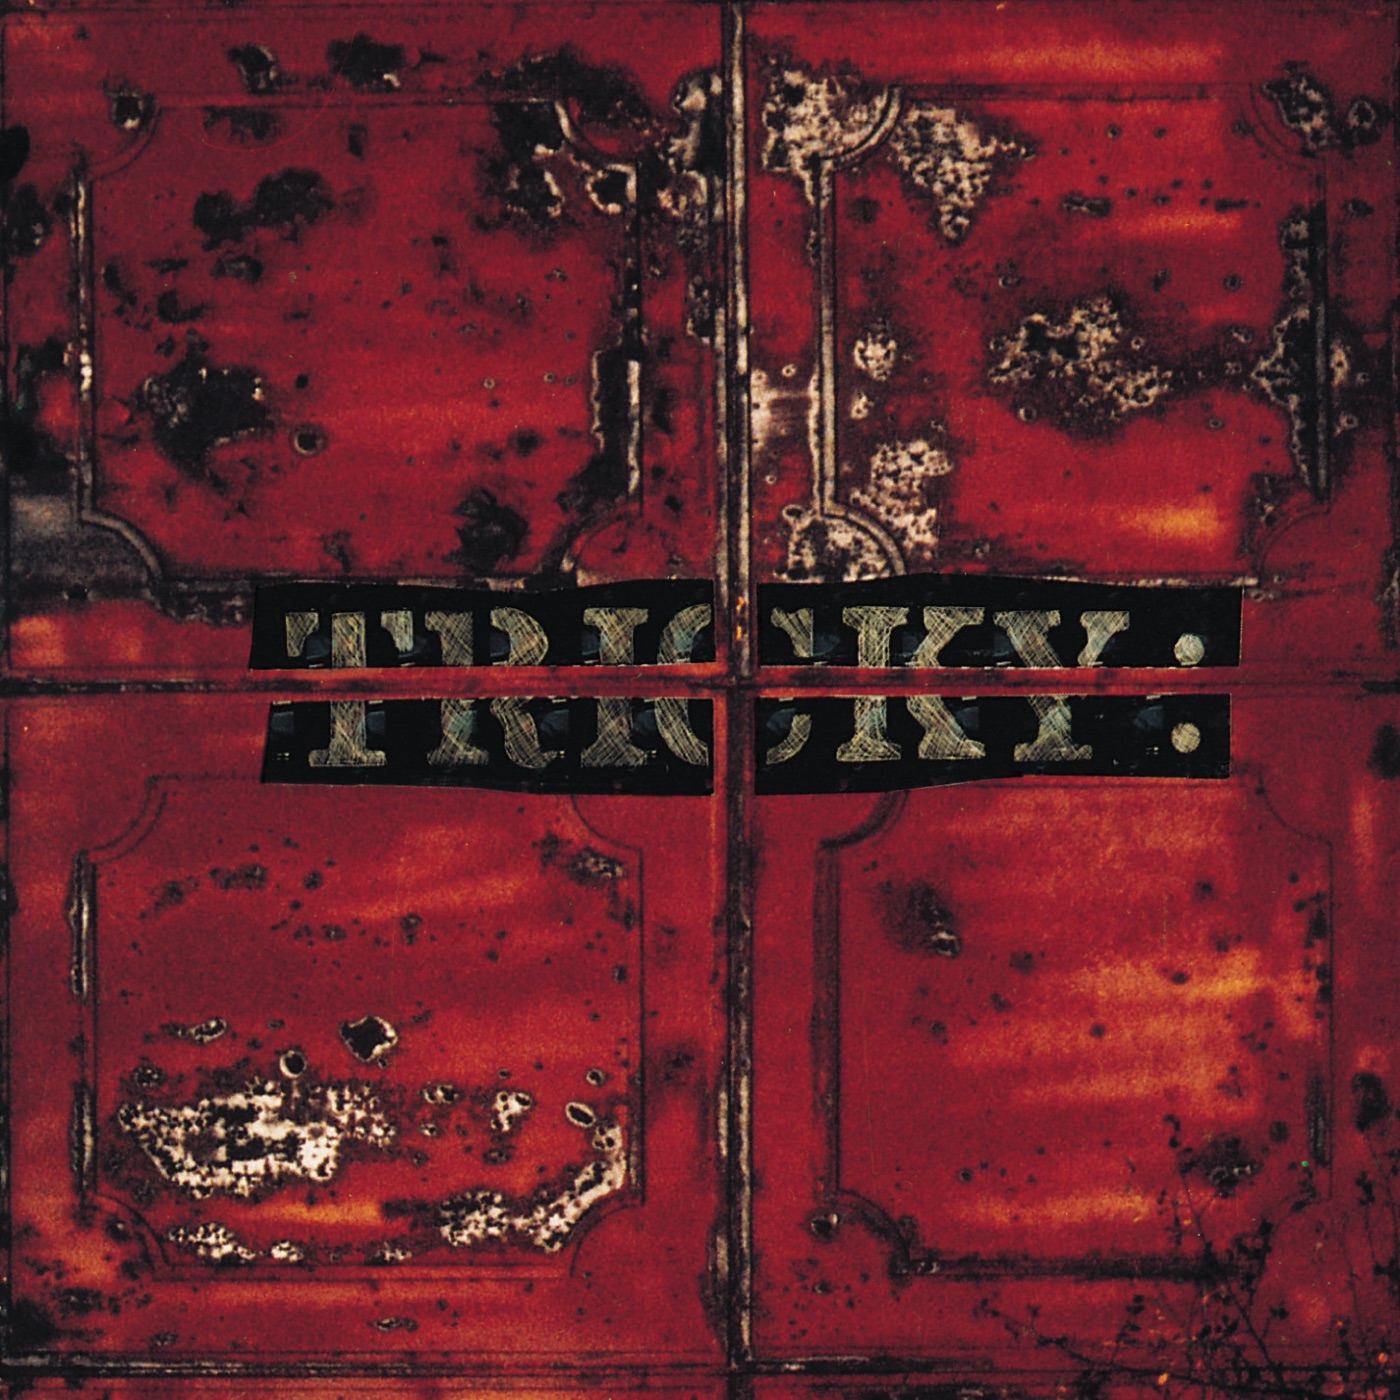 Maxinquaye by Tricky, Maxinquaye (Deluxe Edition)